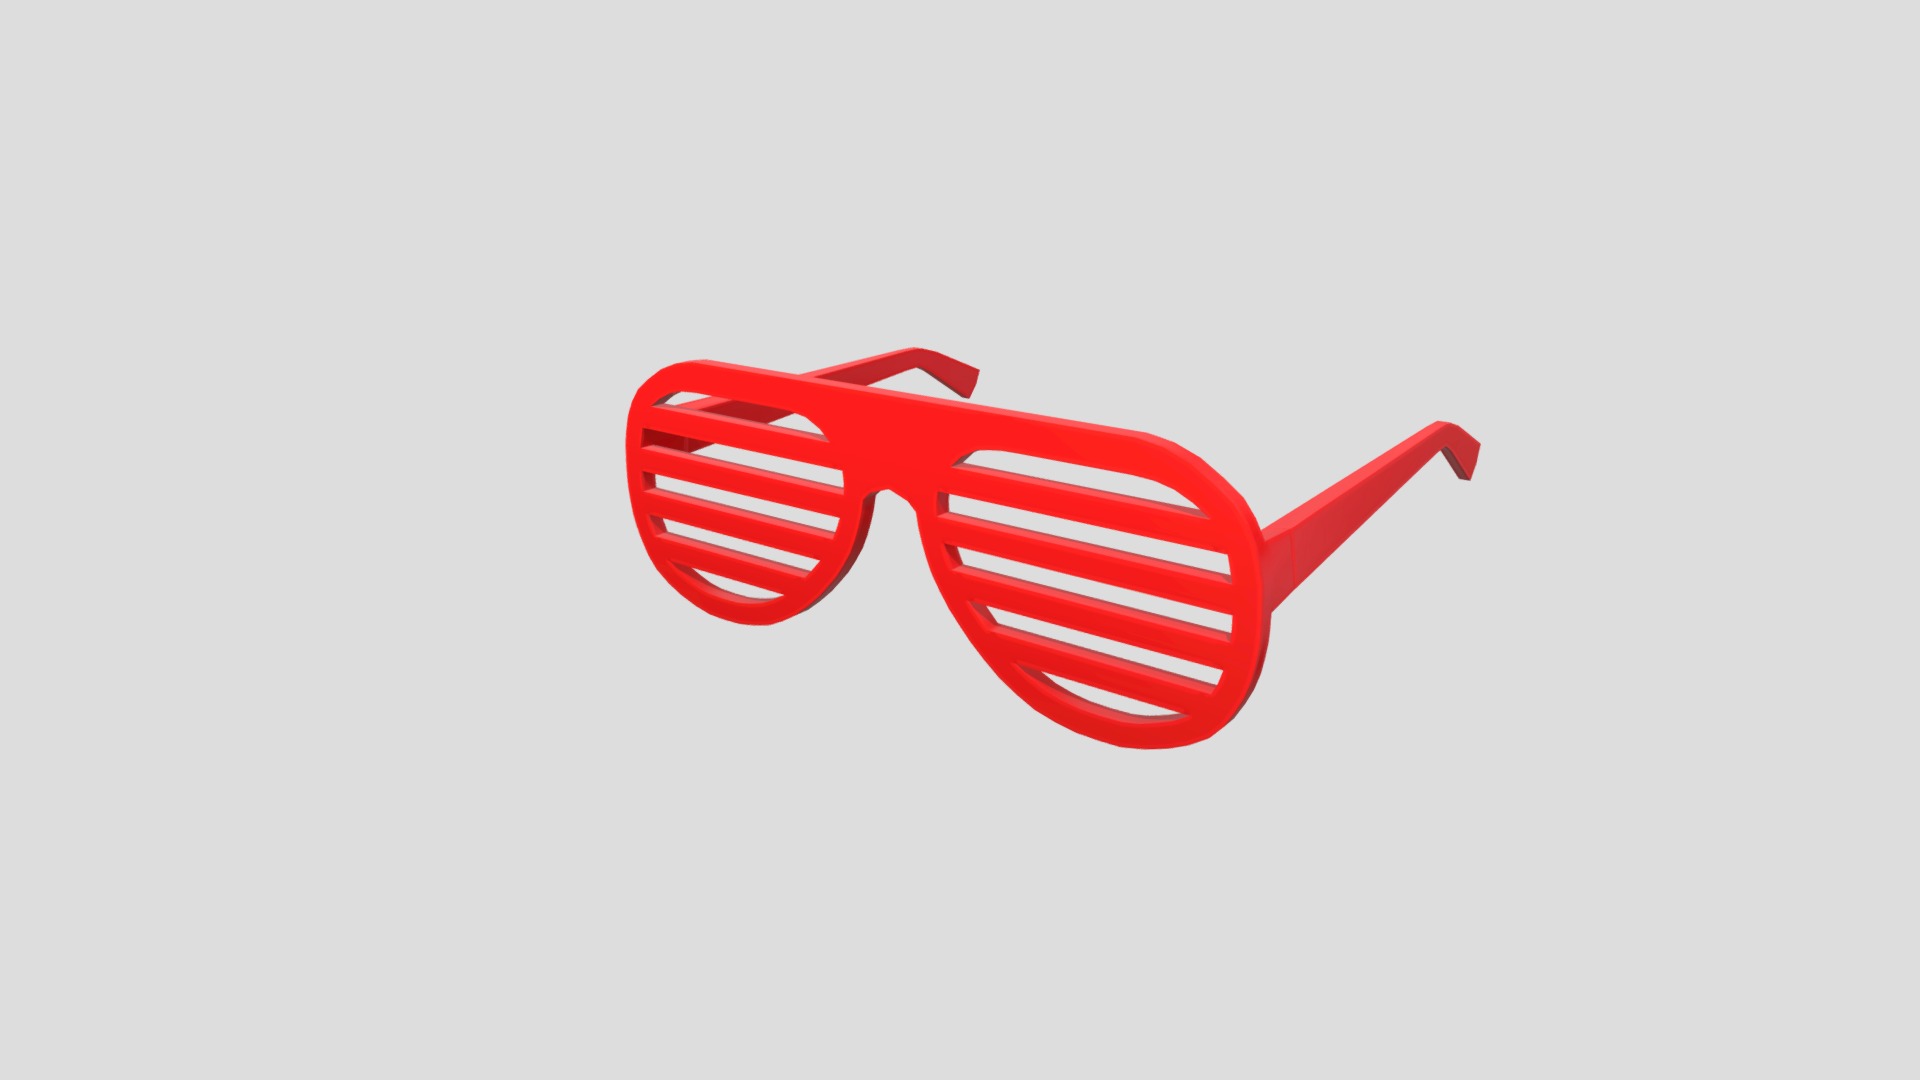 3D model Shutter Shade Sun Glasses - This is a 3D model of the Shutter Shade Sun Glasses. The 3D model is about a red and white logo.